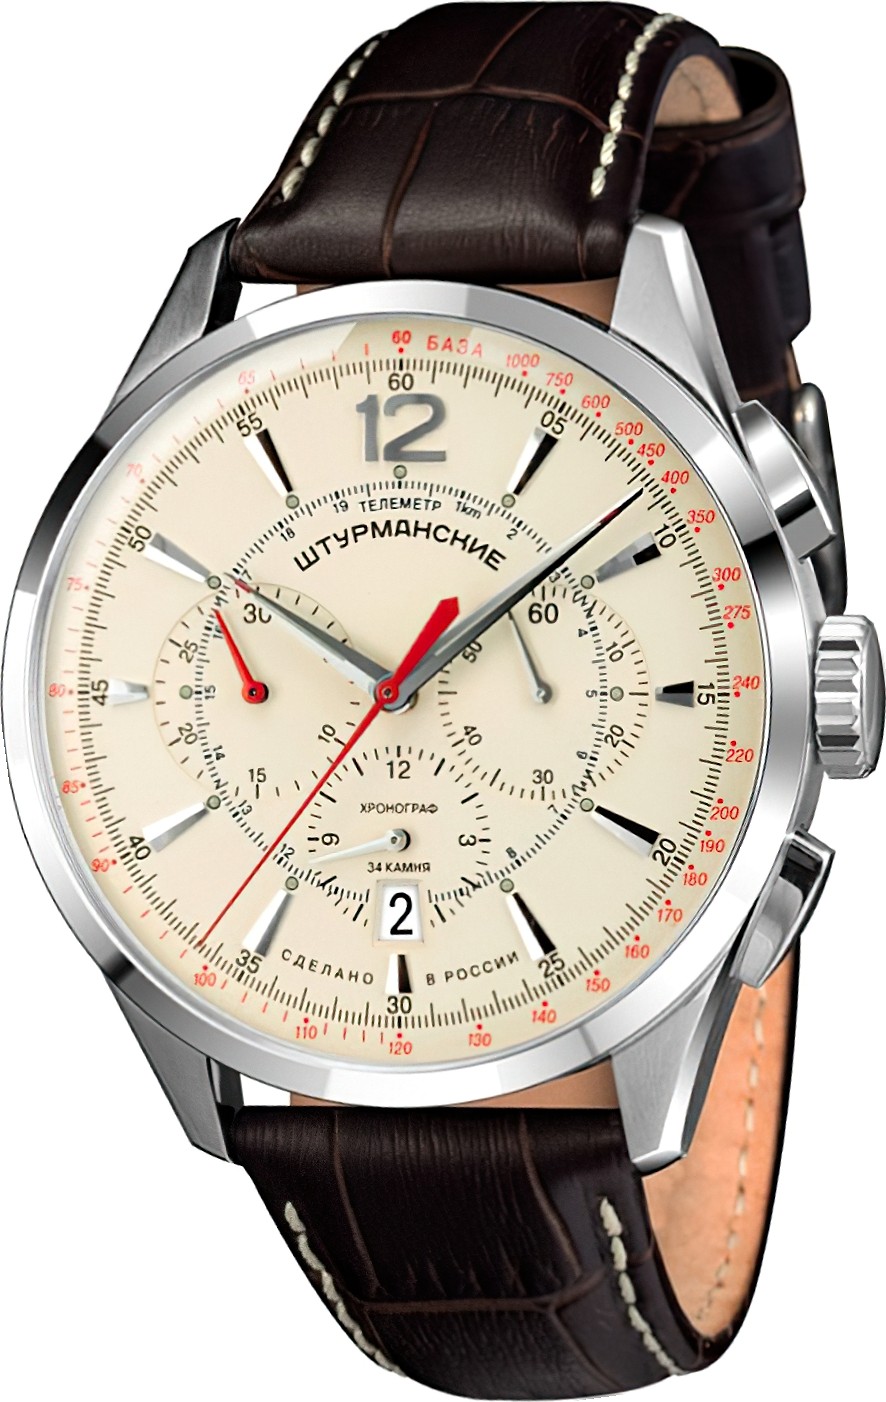  Sturmanskie Open Space Special Edition  Automatic Chronograph 